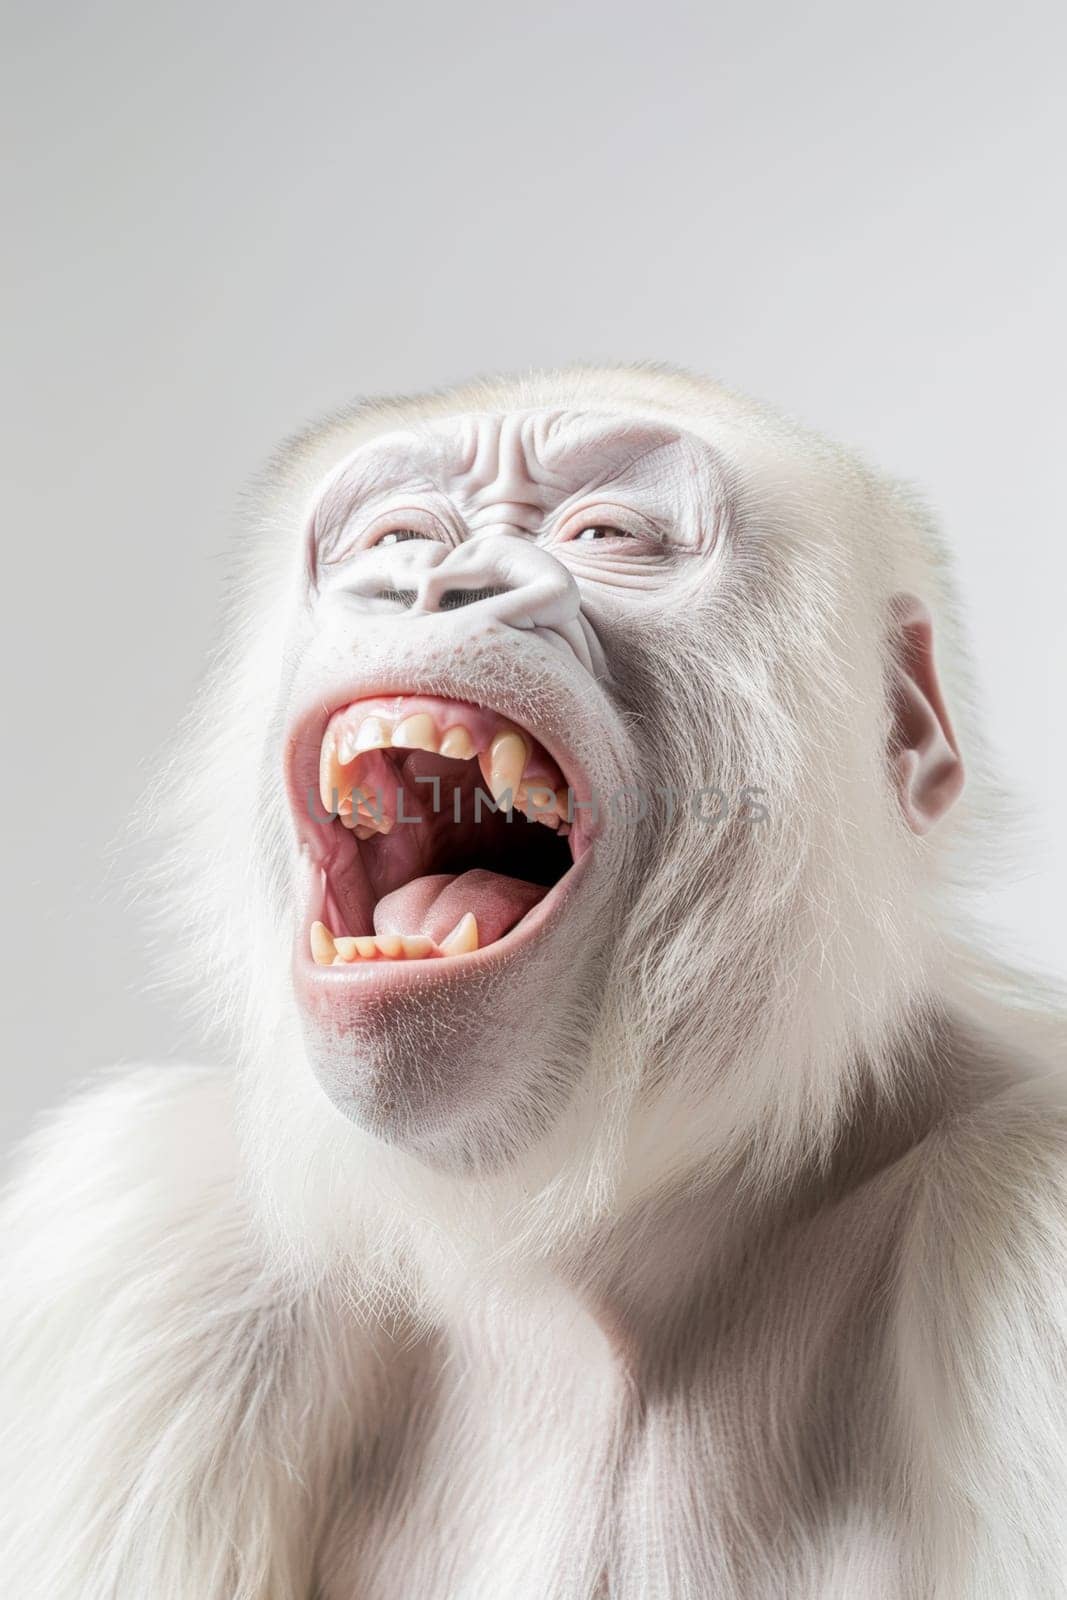 A white screaming monkey highlighted on a white background.